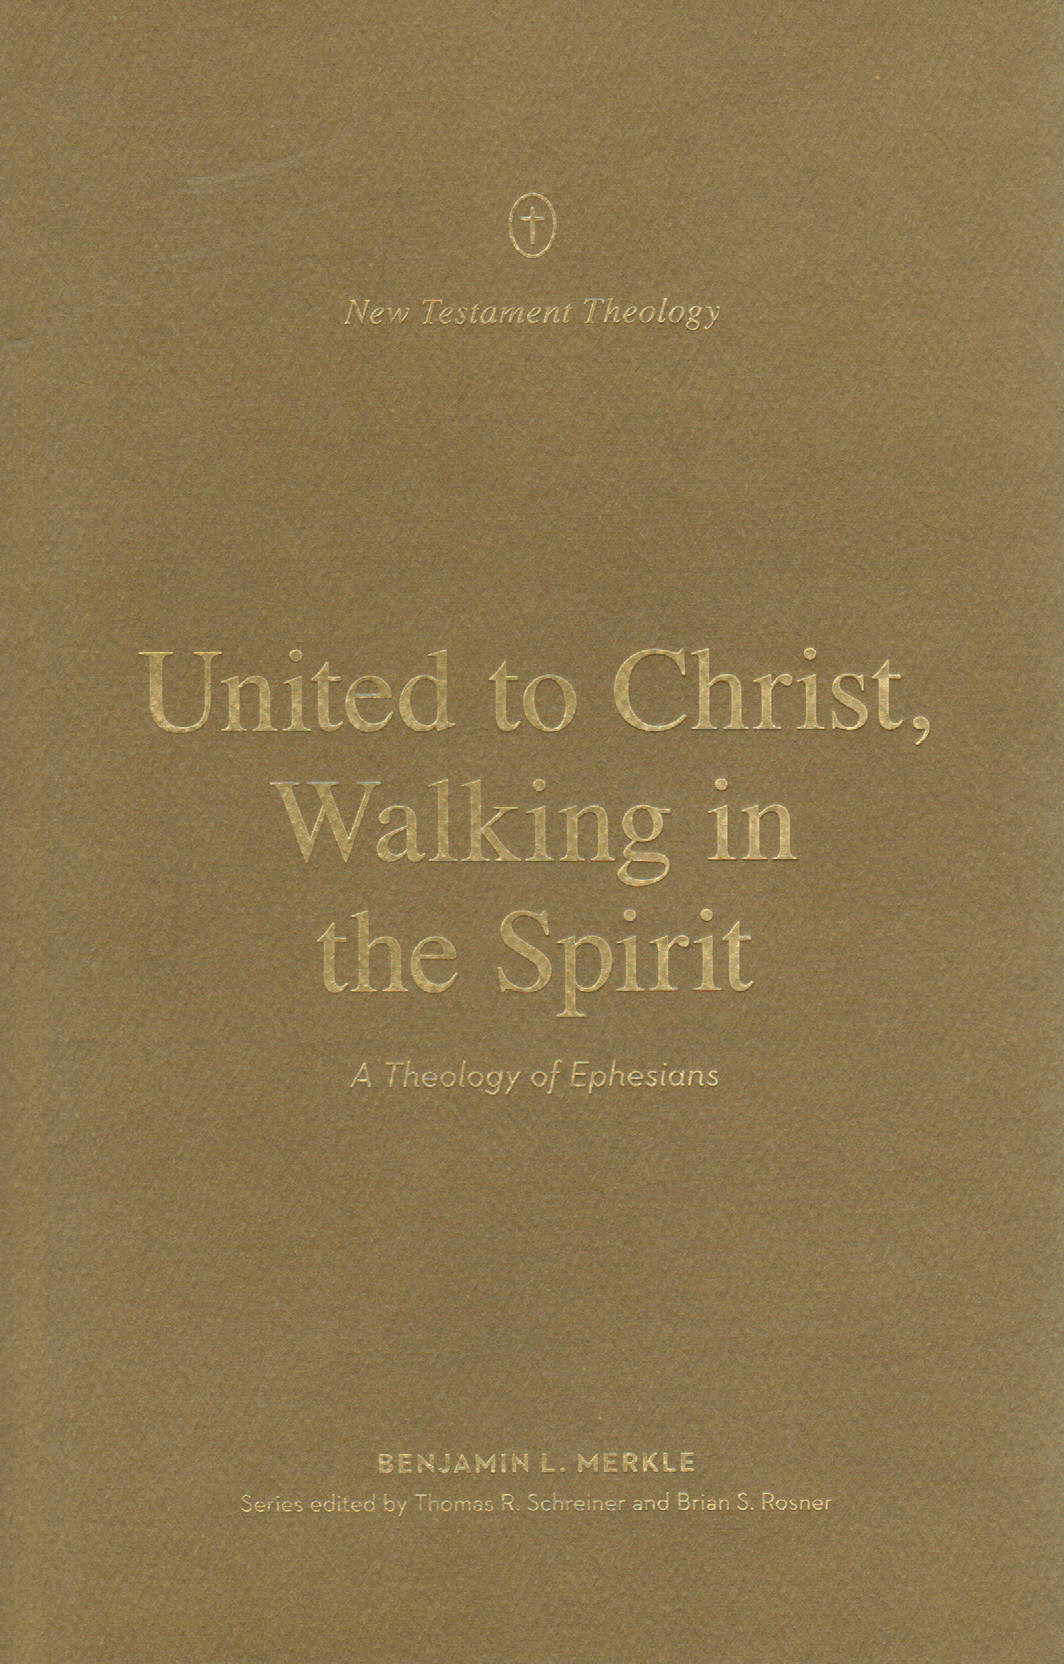 United to Christ, Walking in the Spirit: A Theology of Ephesians